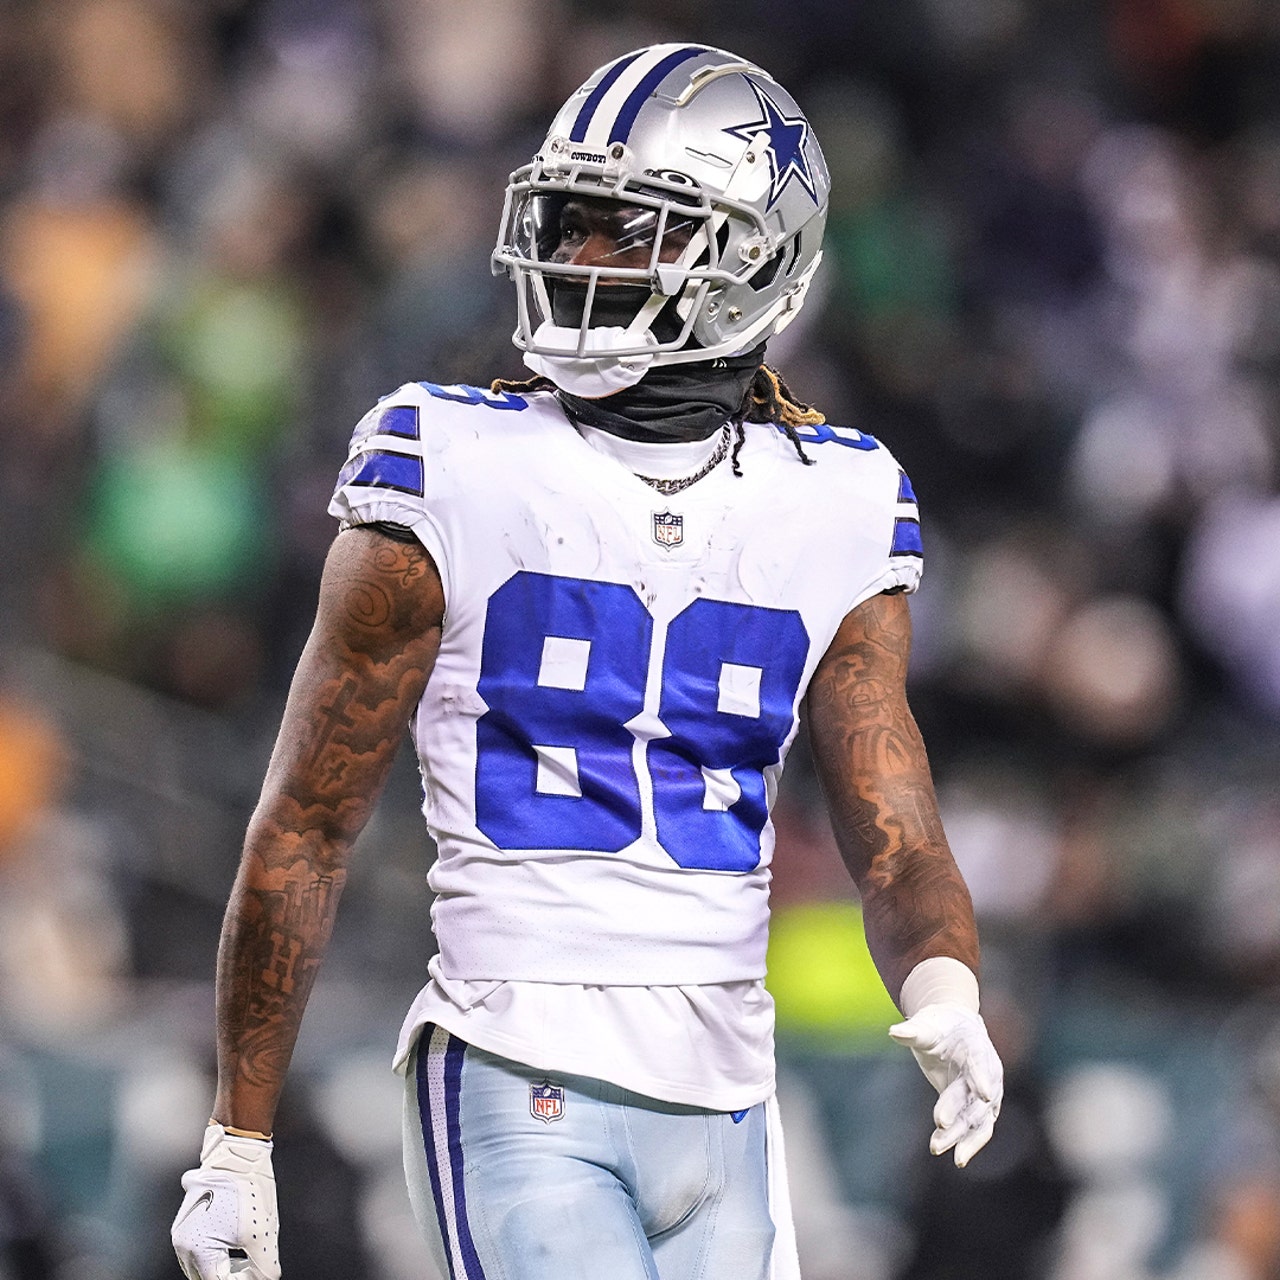 CeeDee Lamb embraces the pressure of wearing No. 88 for Cowboys